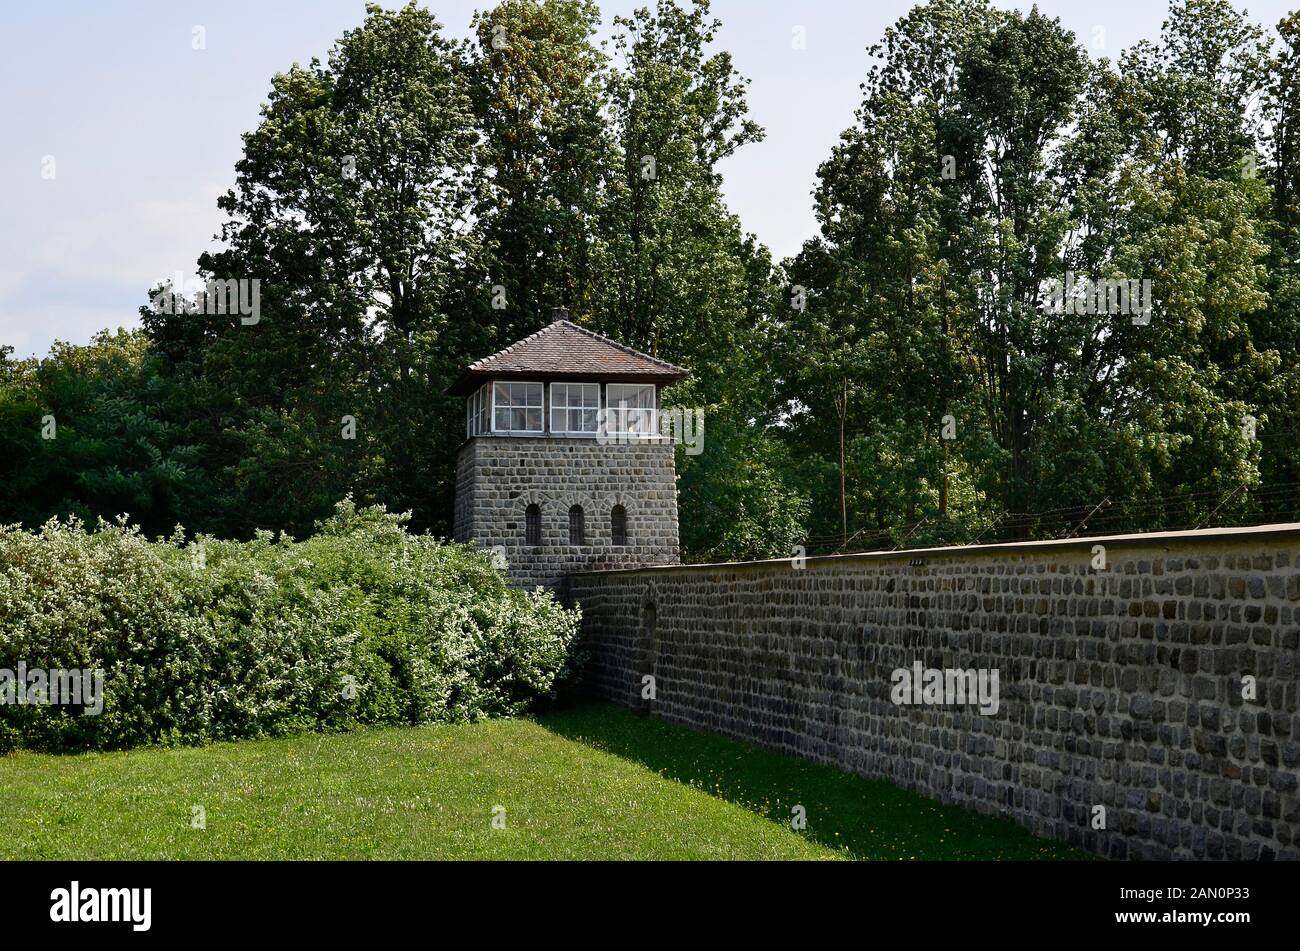 Austria, concentration camp Mauthausen, Holocaust memorial from WWII in Upper Austria Stock Photo